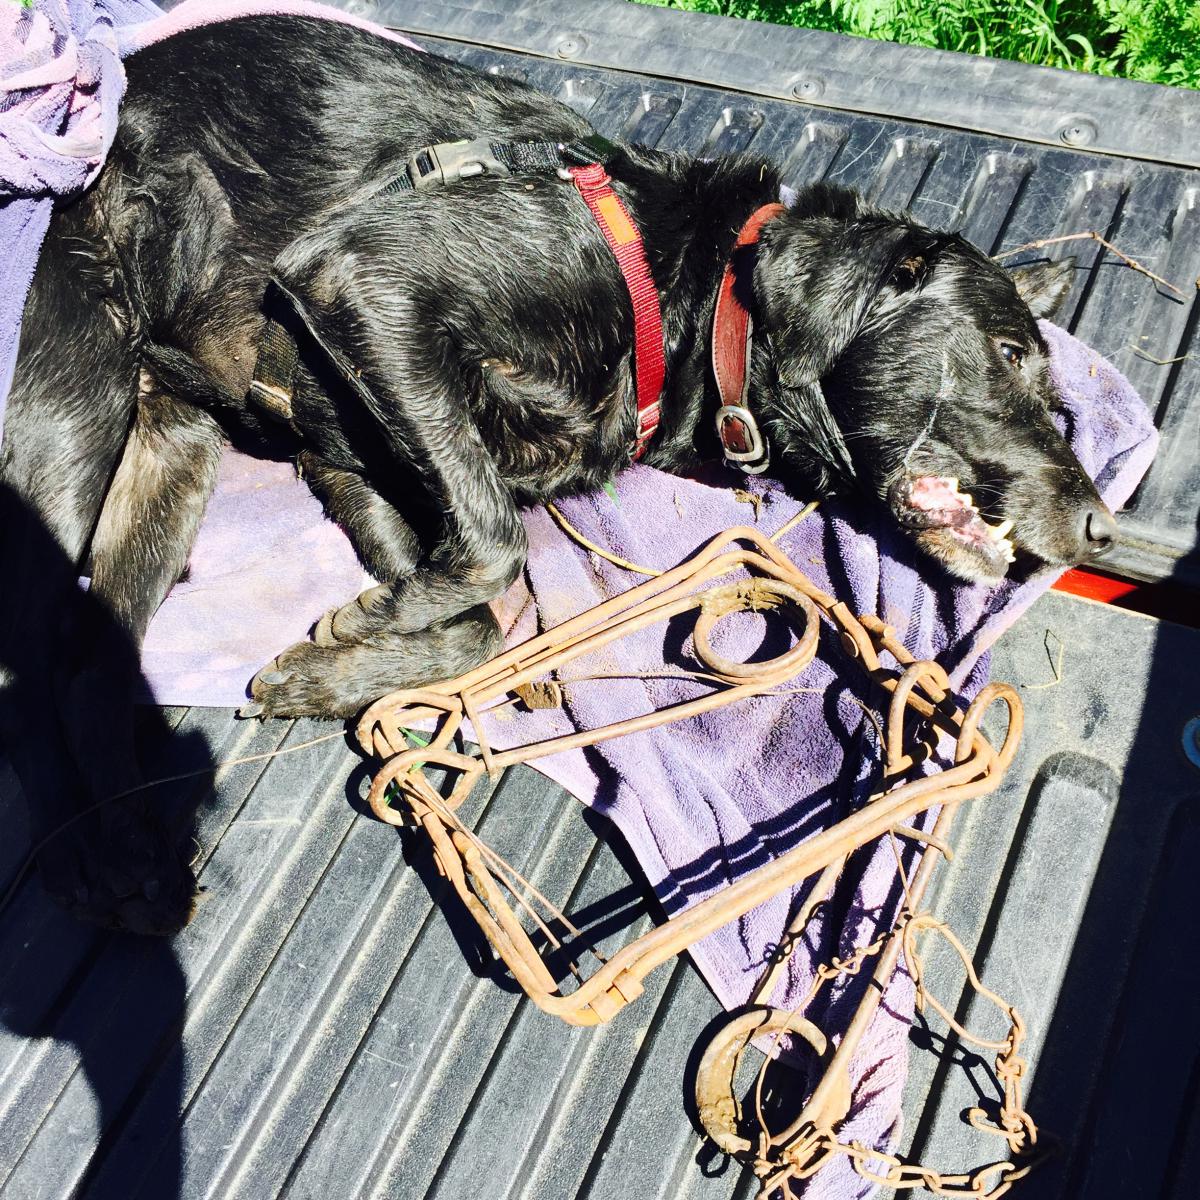 Dog caught in Conibear trap - Trap Free Montana